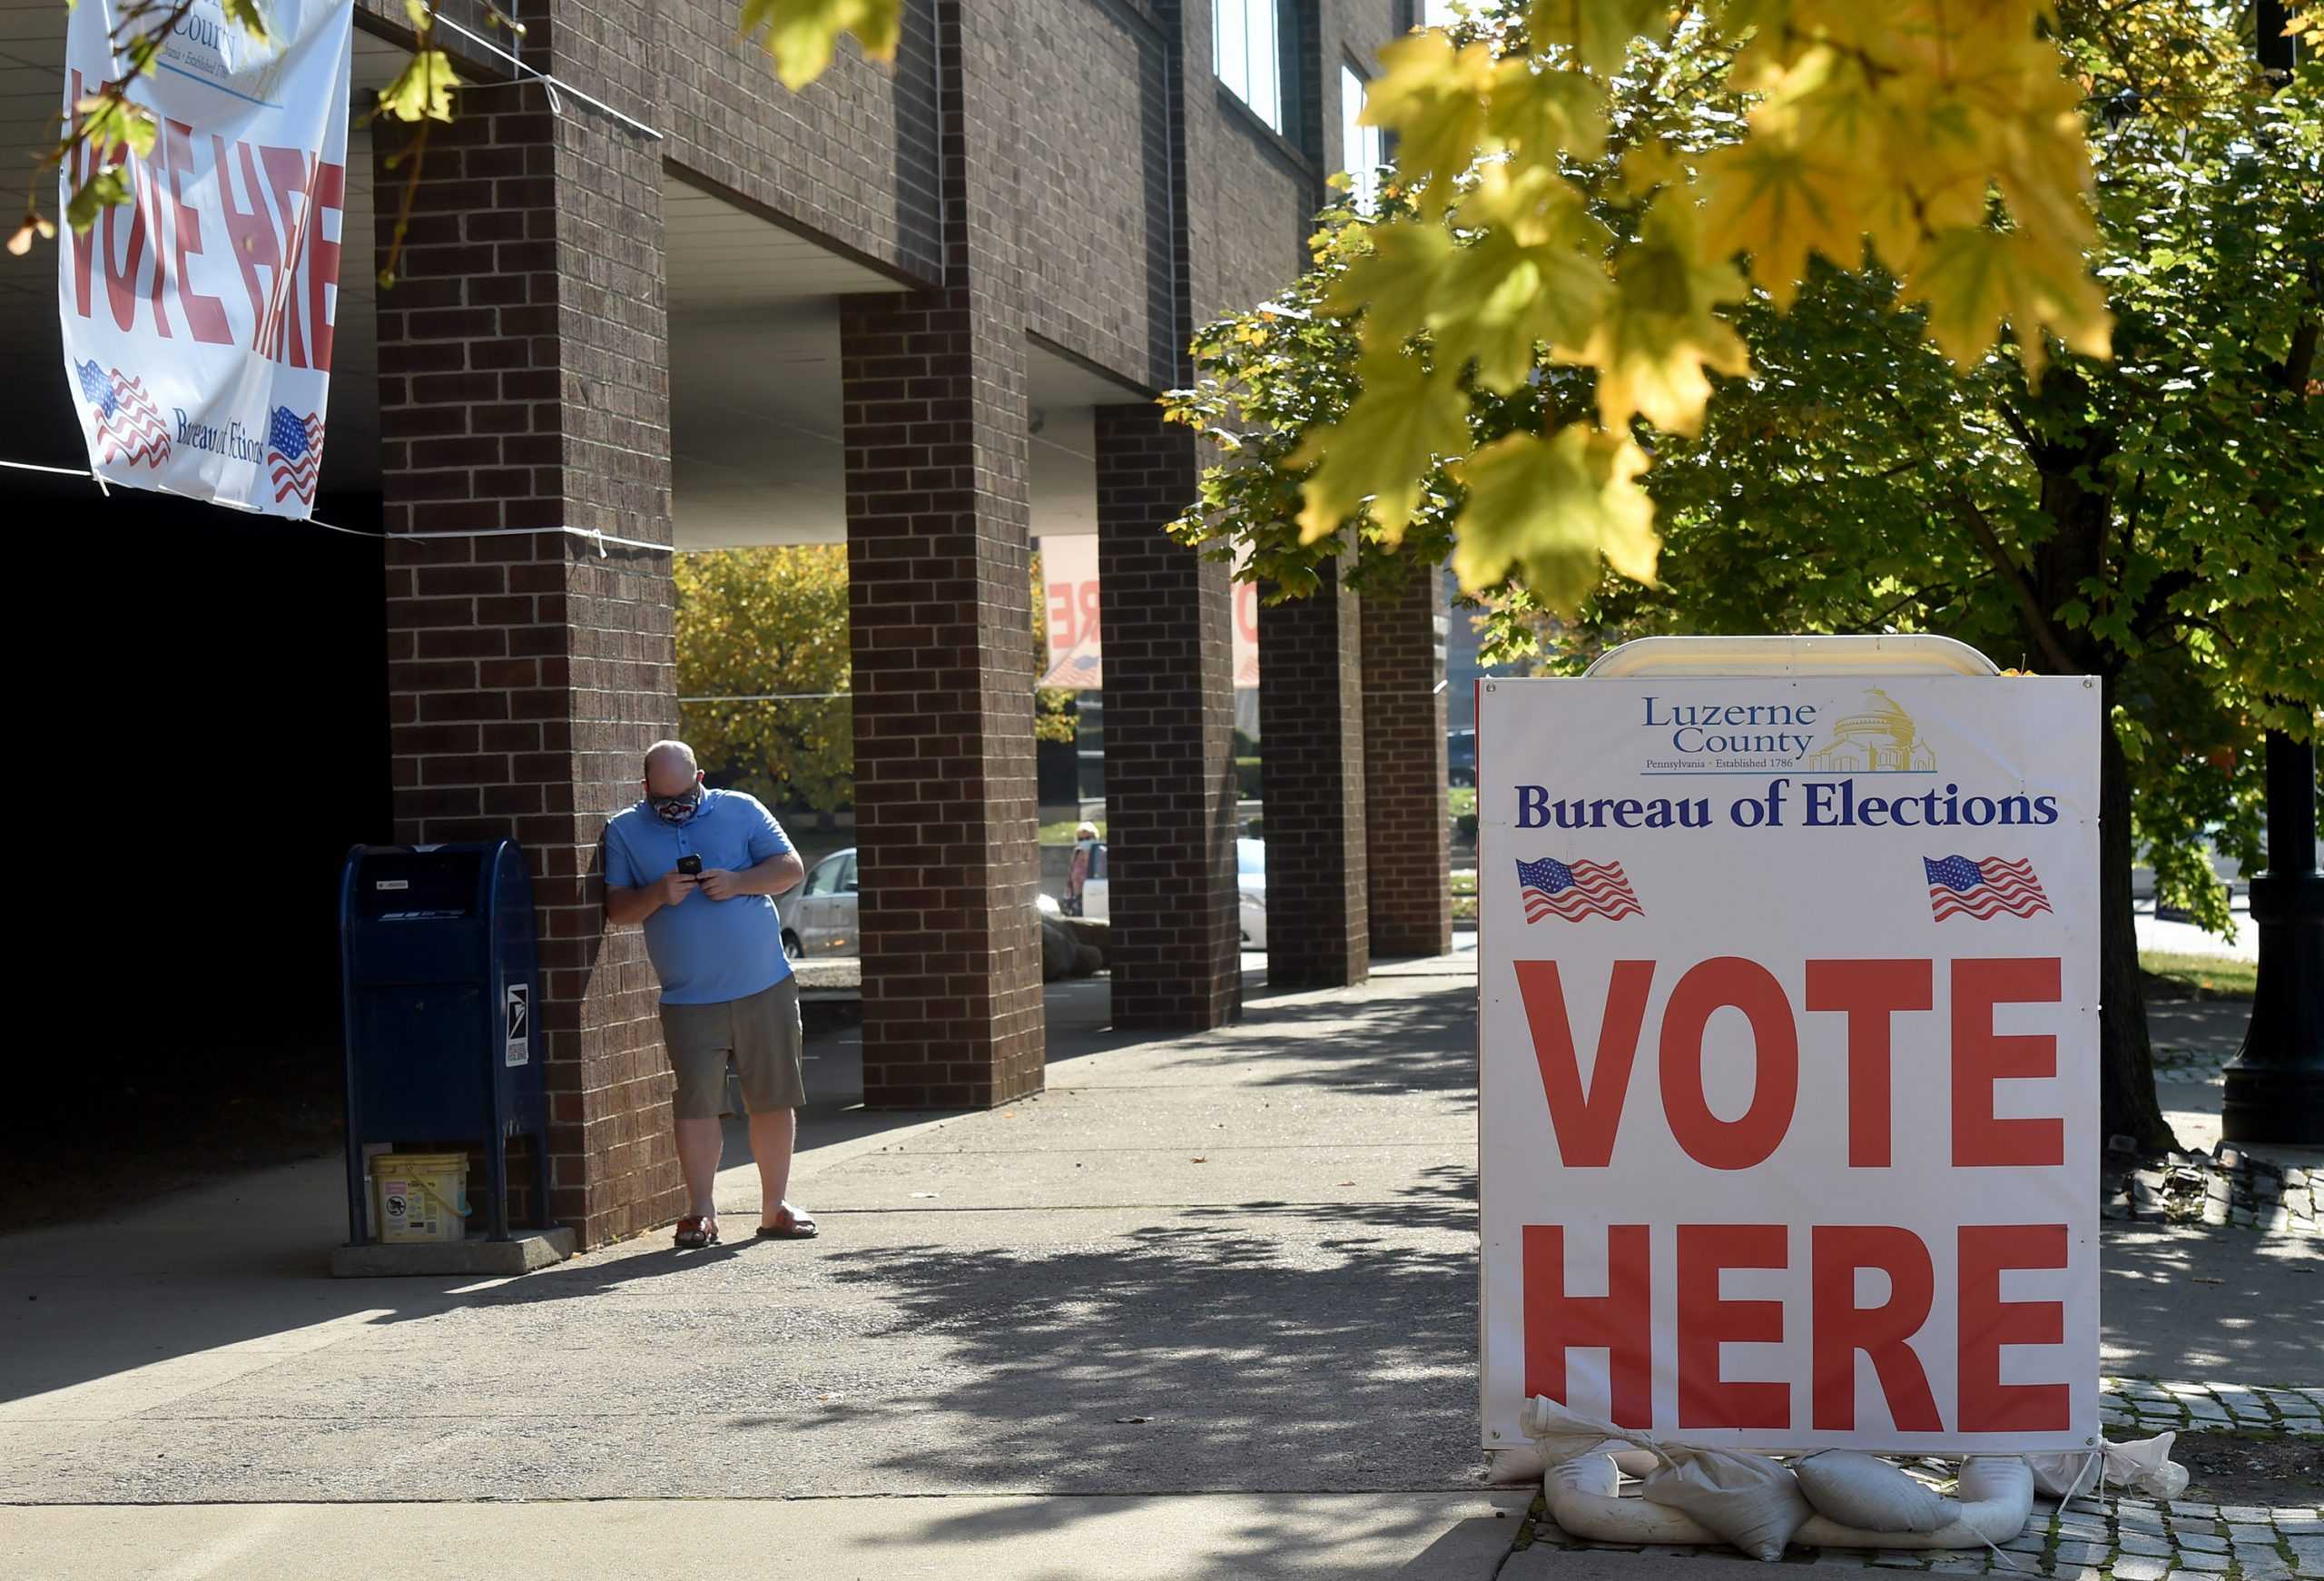 A man waits outside the Luzerne County Board of Elections where people drop off and request for mail-in ballots in Wilkes-Barre, Pennsylvania, on October 22, 2020. (Courtesy Tribune News Service)